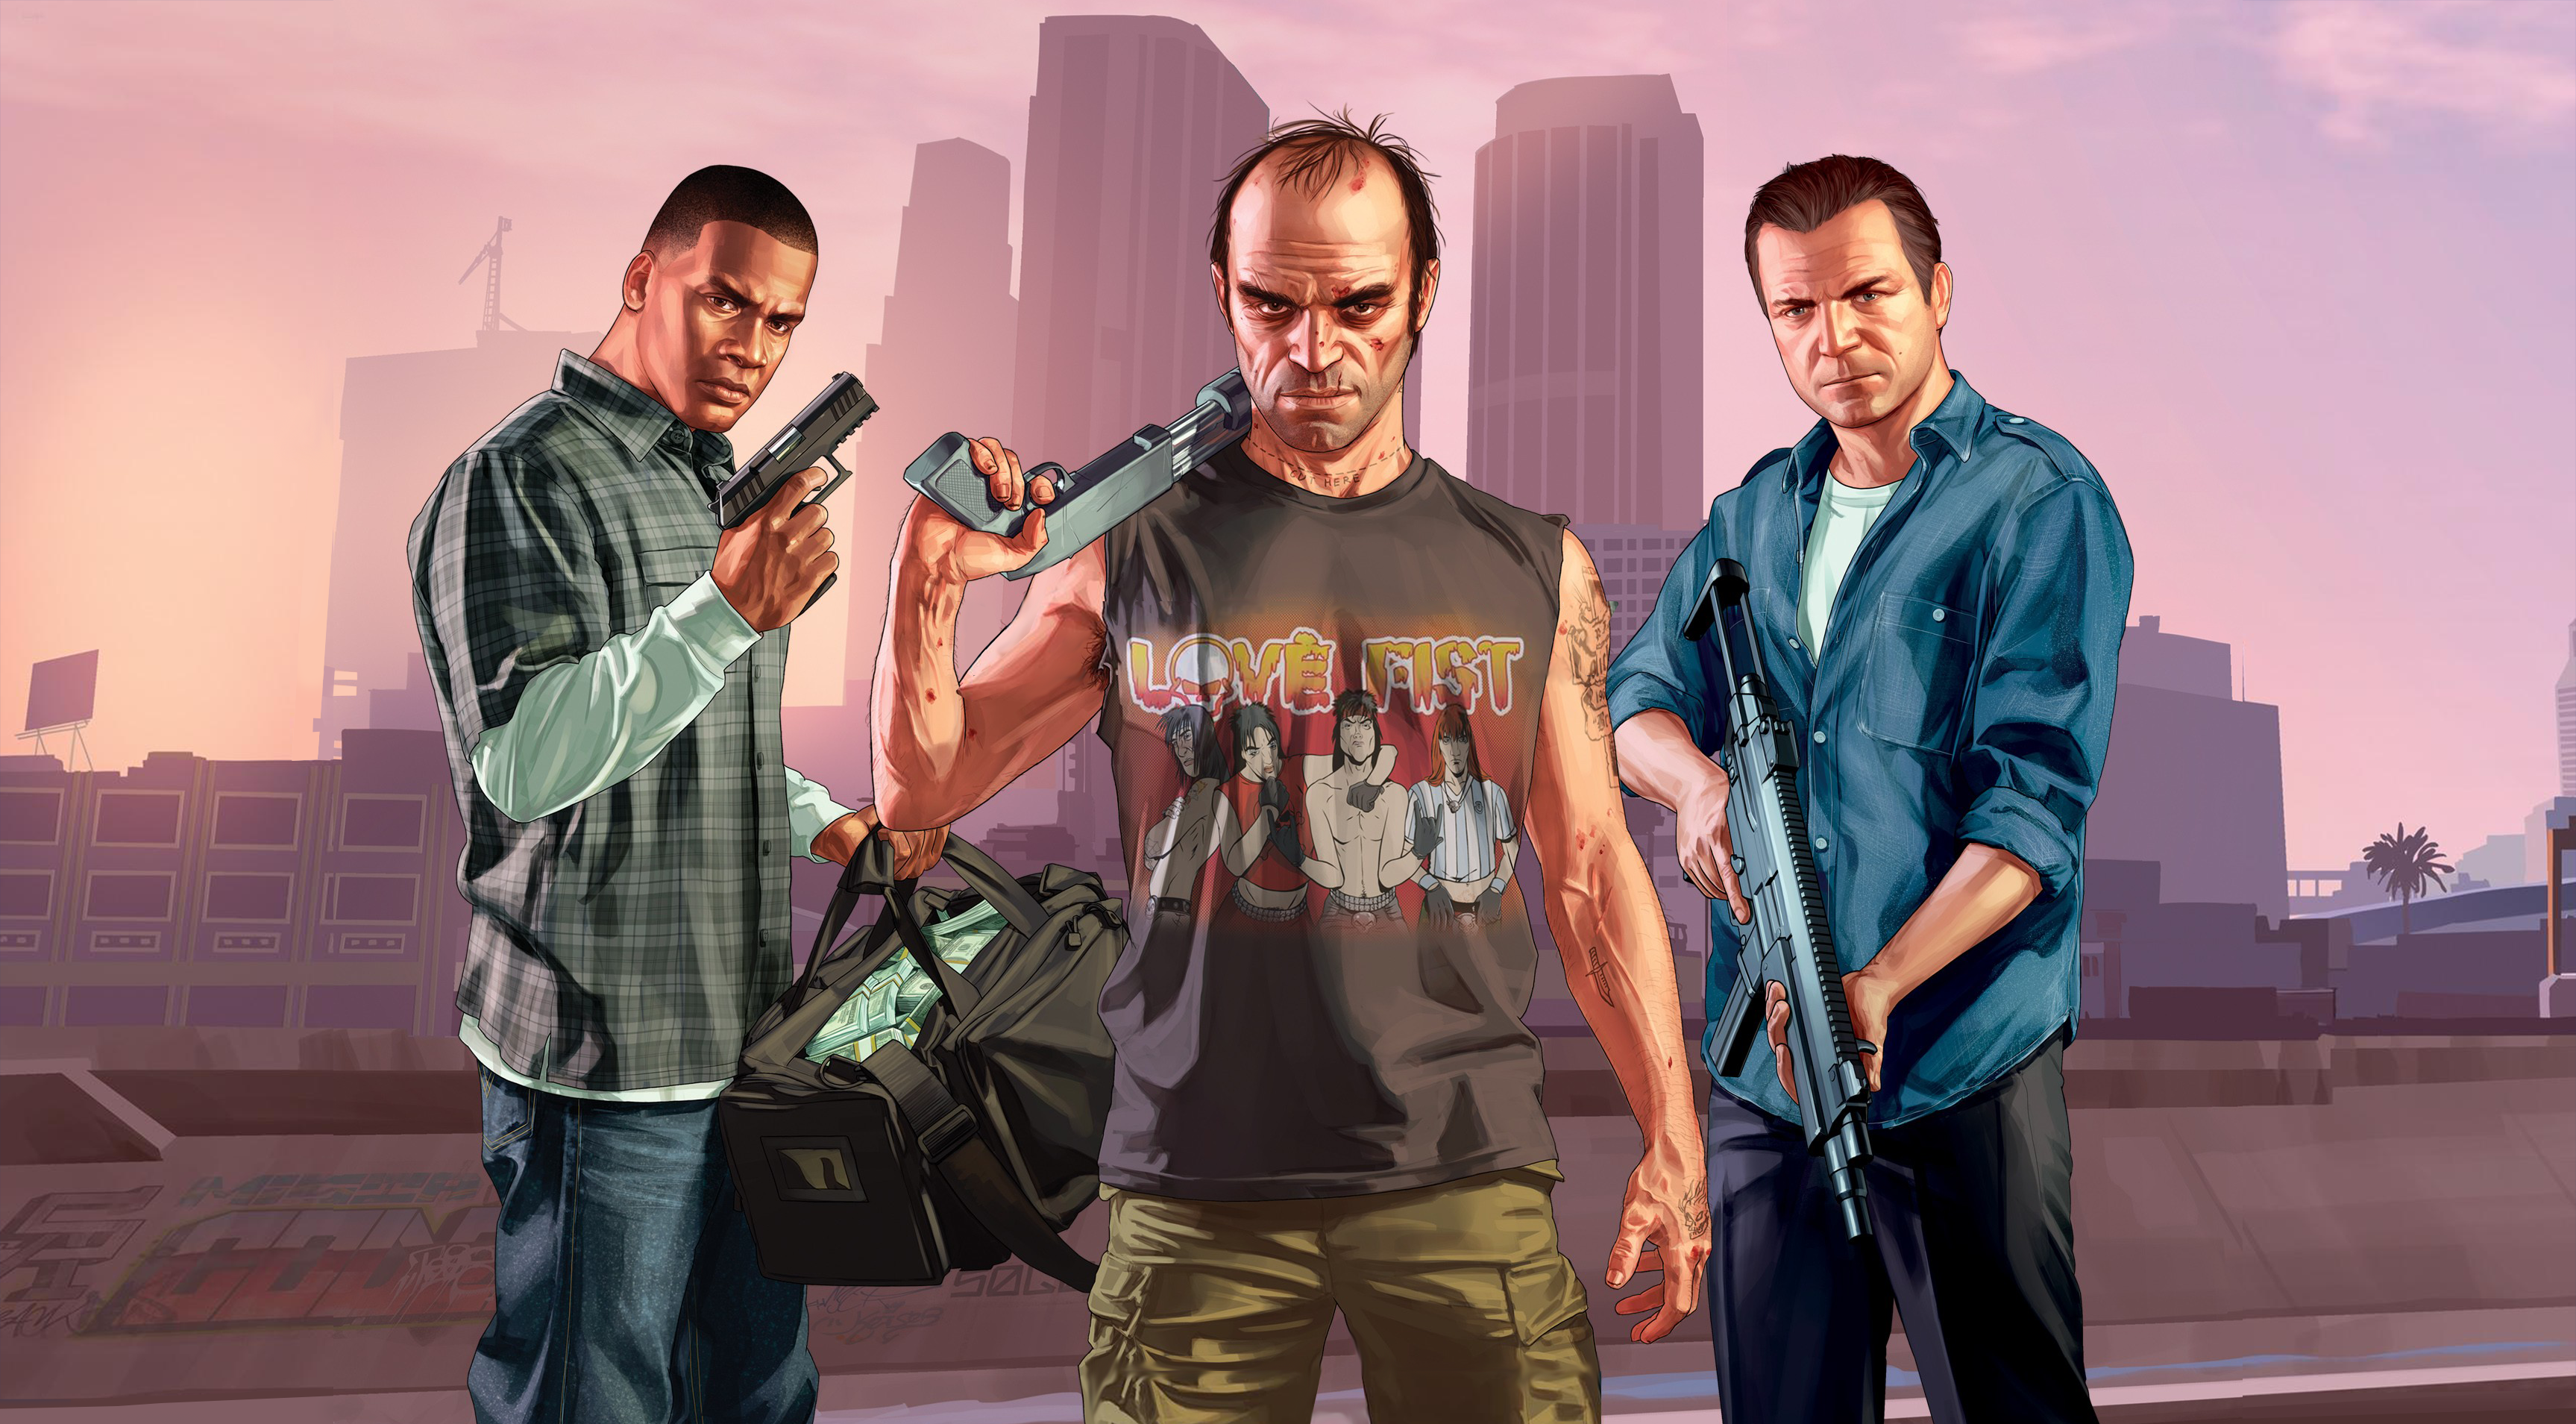 Grand Theft Auto V remains one of the greatest videogames ever 10 years  after release